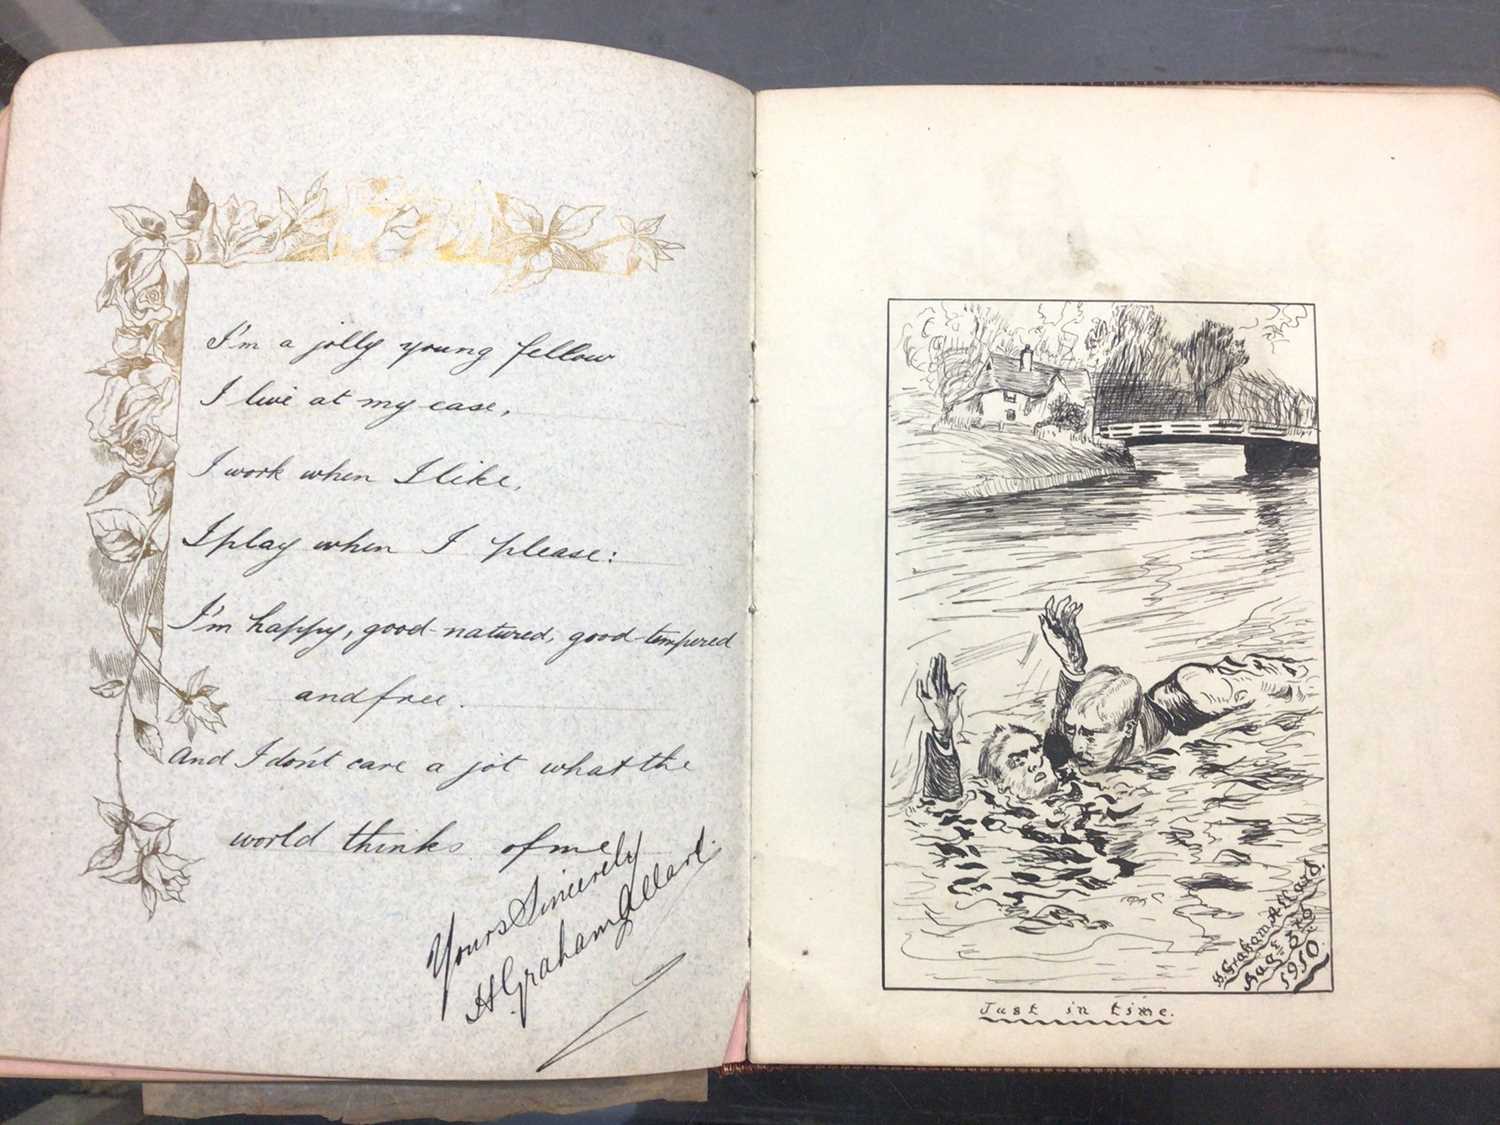 Early 20th century scrap album of drawings and verse, formerly the property of Charlotte Victoria Ma - Image 5 of 6